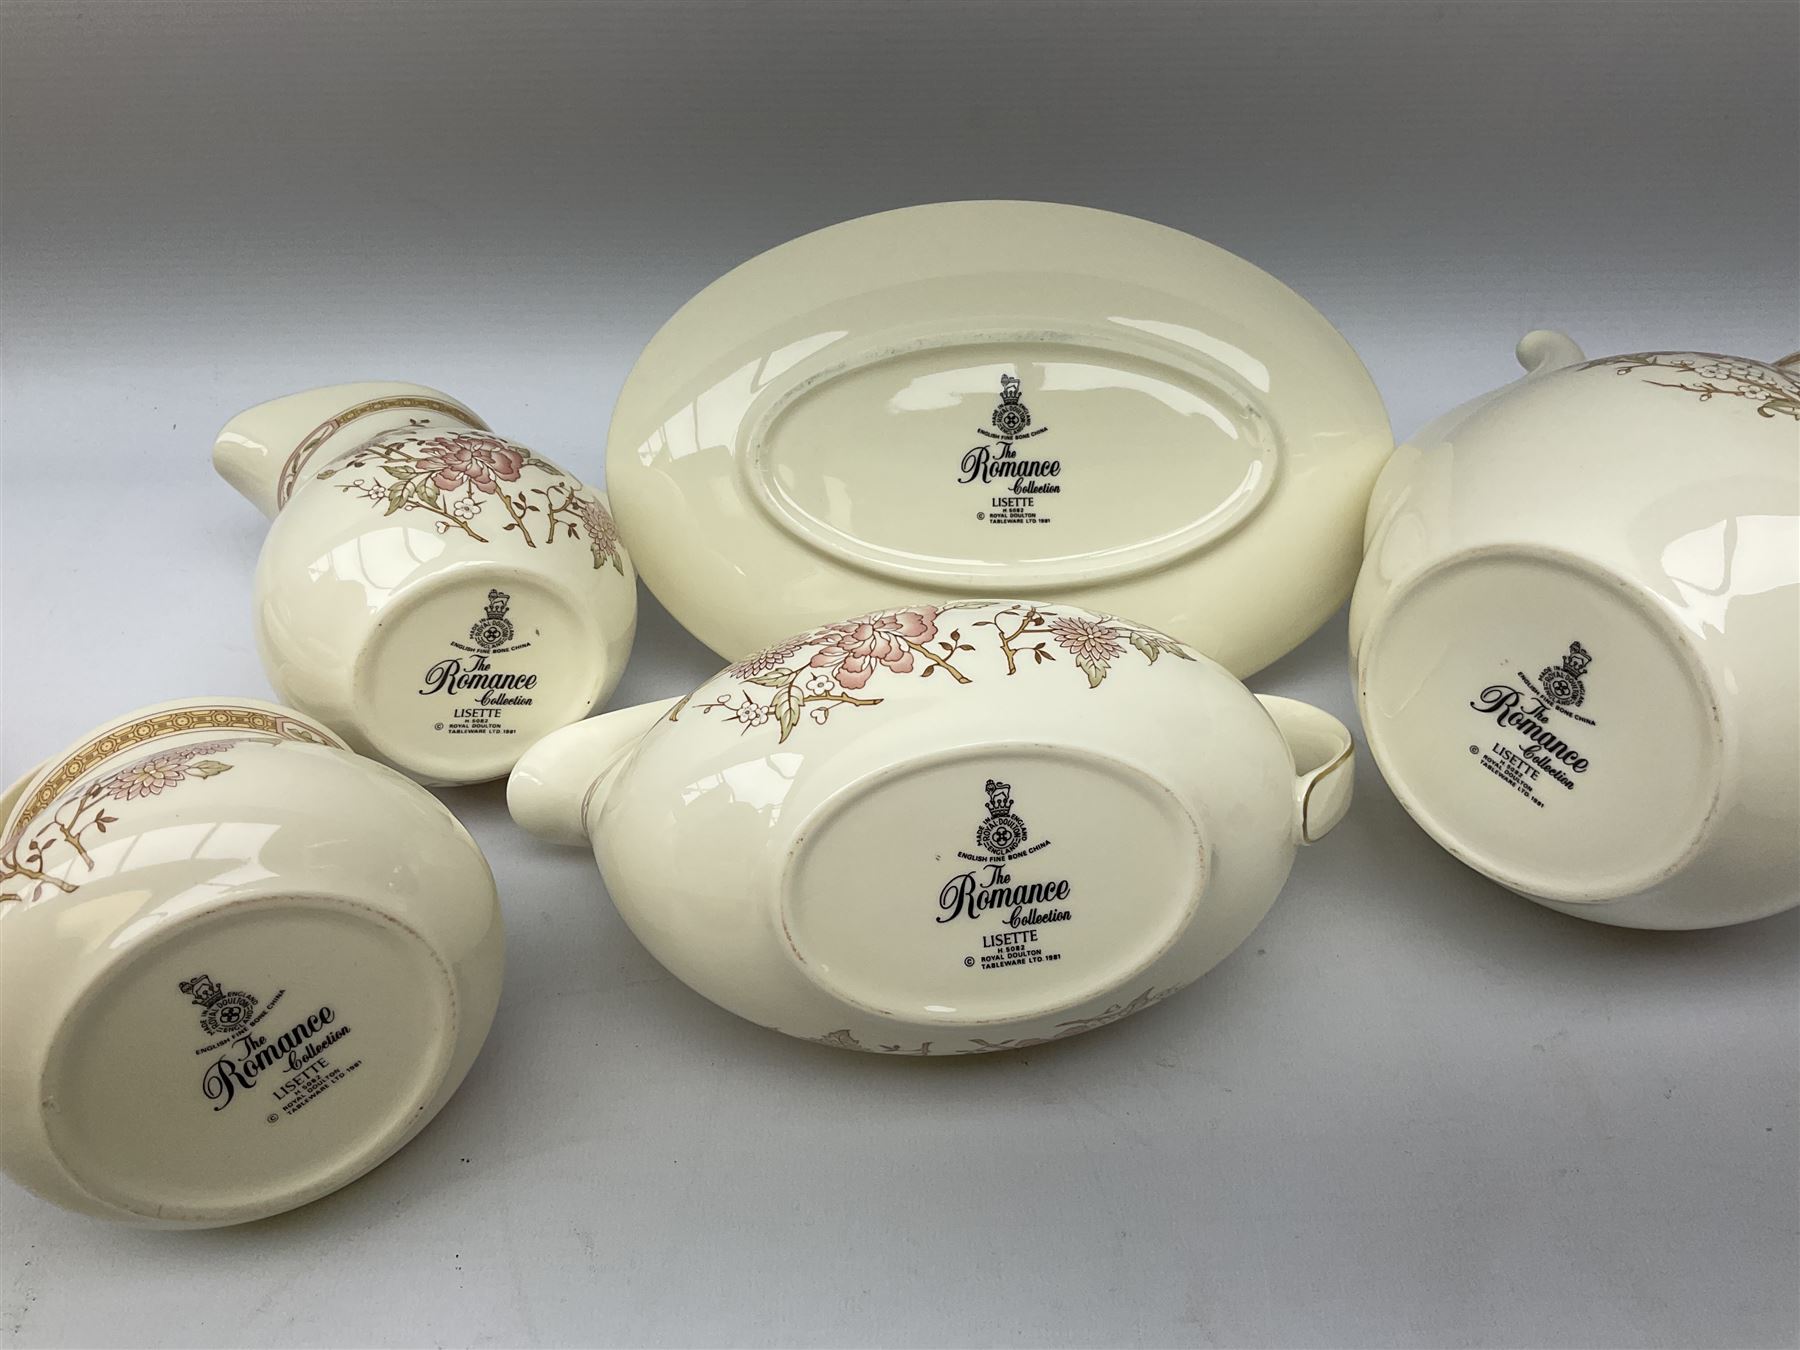 Royal Doulton ‘The Romance Collection’ dinner service decorated in the ‘Lisette’ pattern for six - Image 4 of 4